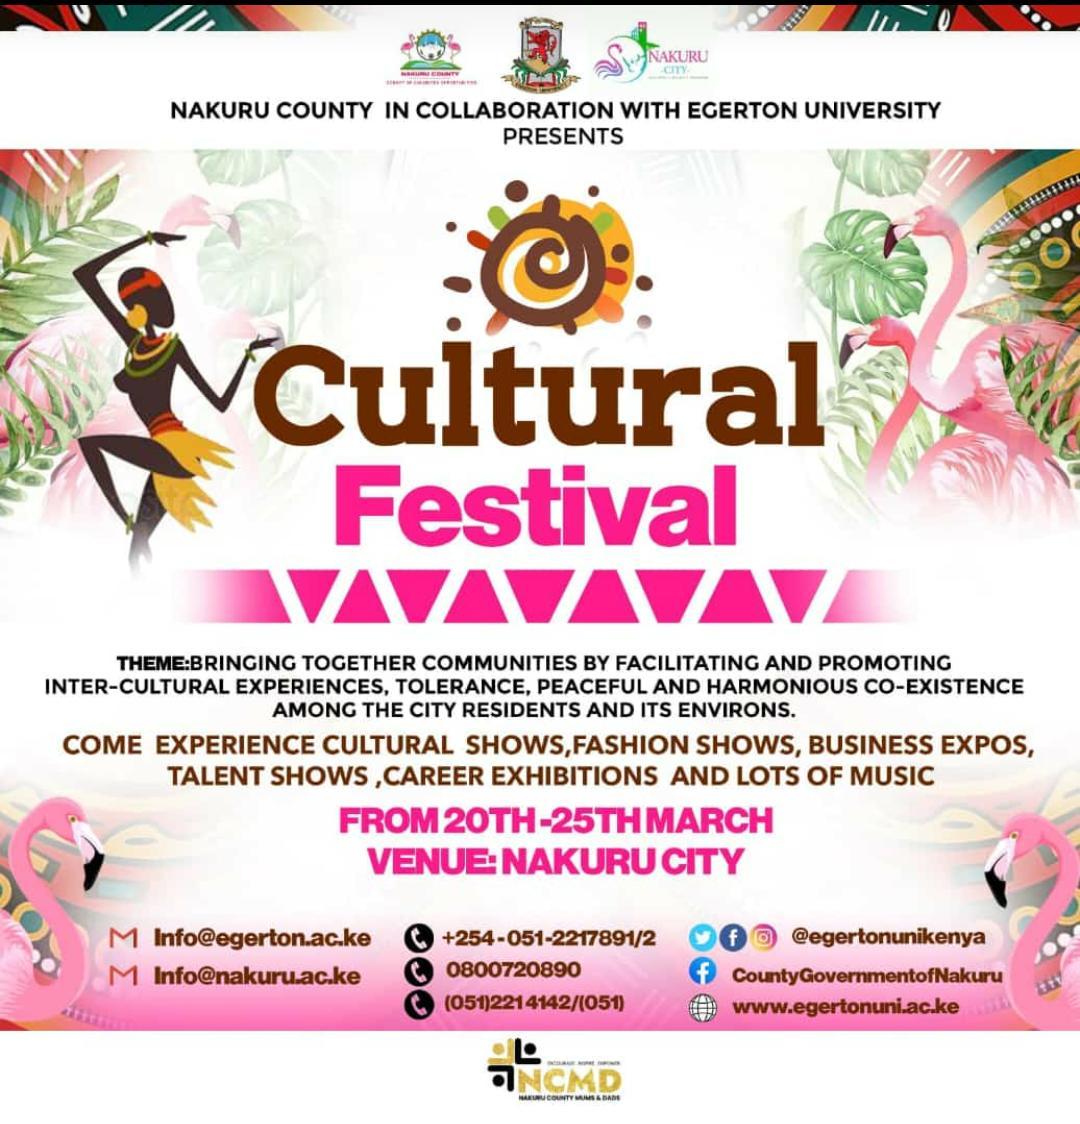 We all have cultures and each one of them needs to be appreciated.
Courtesy of @nakurucounty and @egertonuniversity  we have one big cultural festival pale Nakuru .
#NaksCityCulture
#EgertonCultureWeek